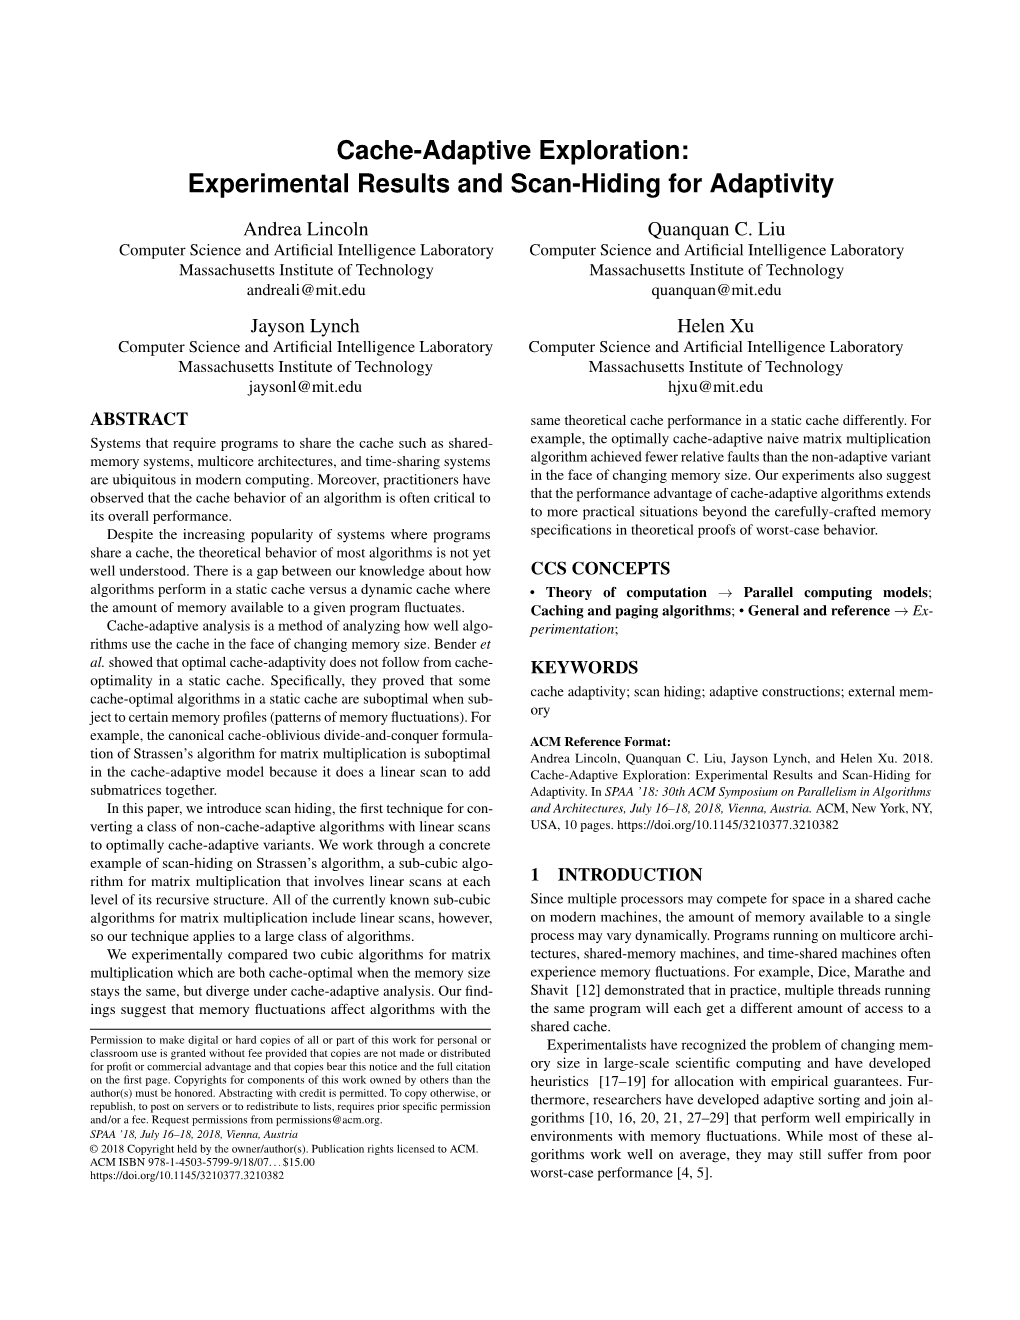 Cache-Adaptive Exploration: Experimental Results and Scan-Hiding for Adaptivity